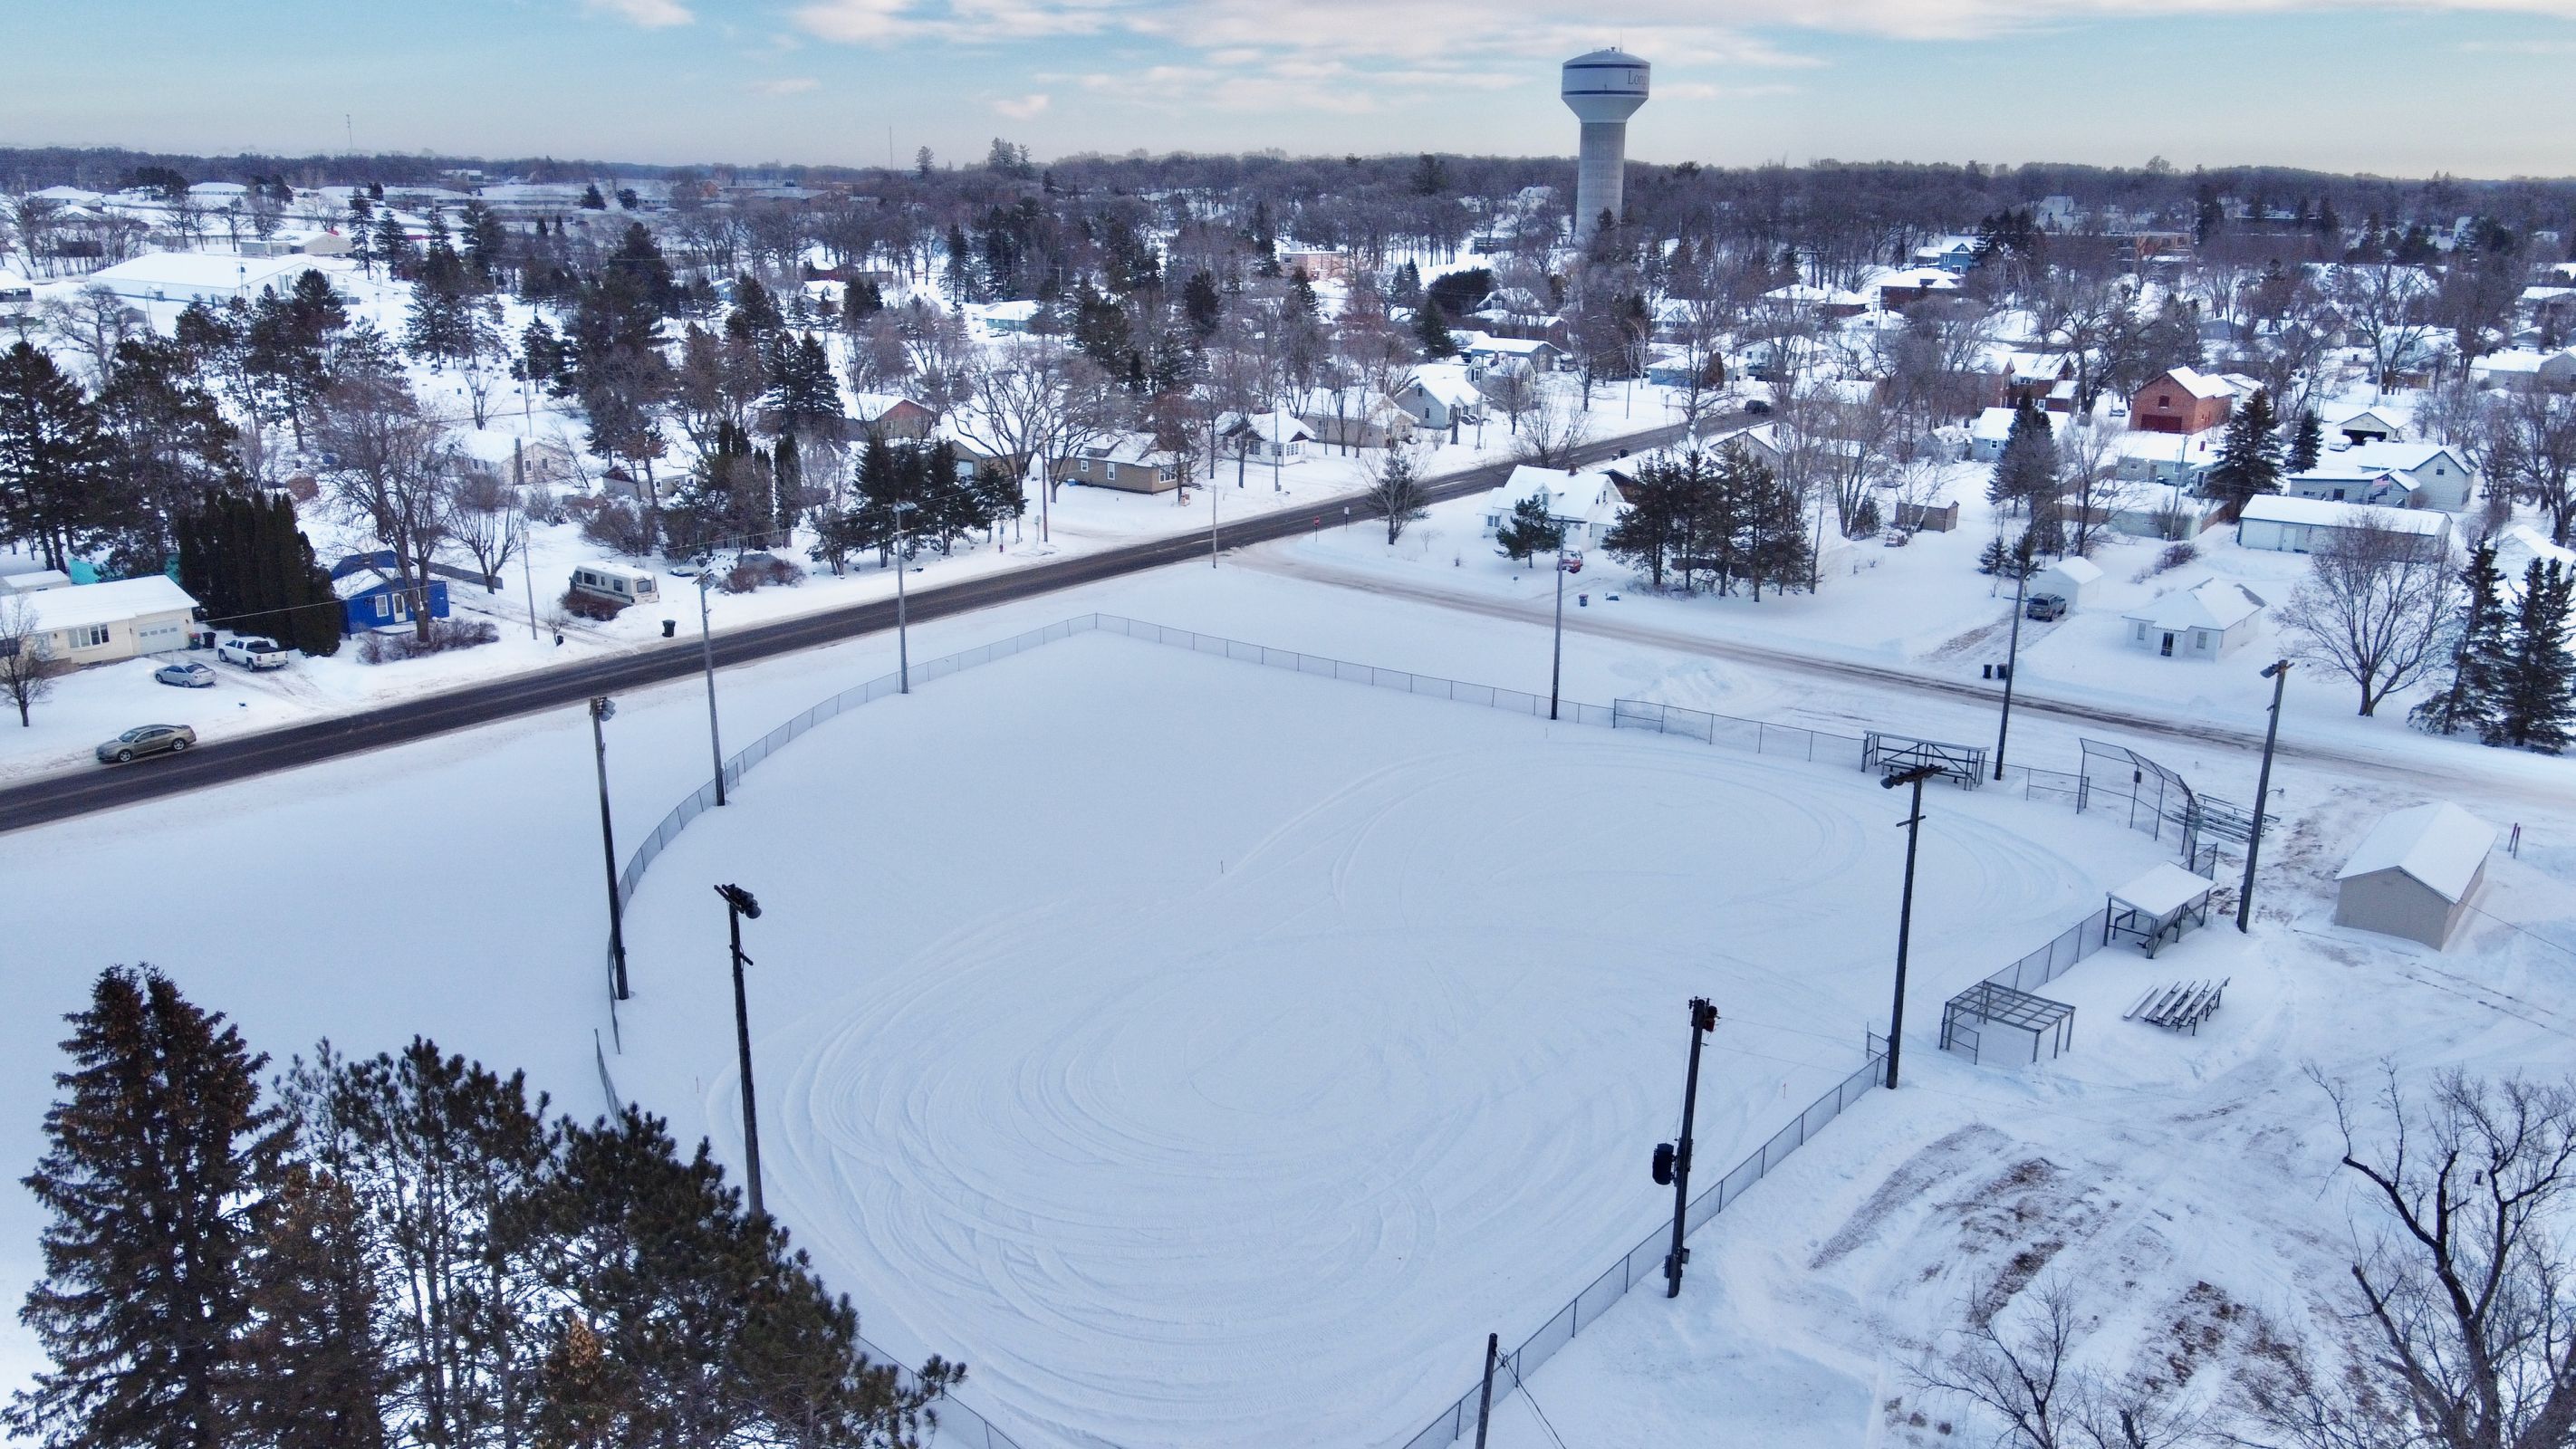 Click the Long Prairie’s very own Ice Skating Rink: Hot chocolate and a warming house welcome skaters during the winter season! Slide Photo to Open